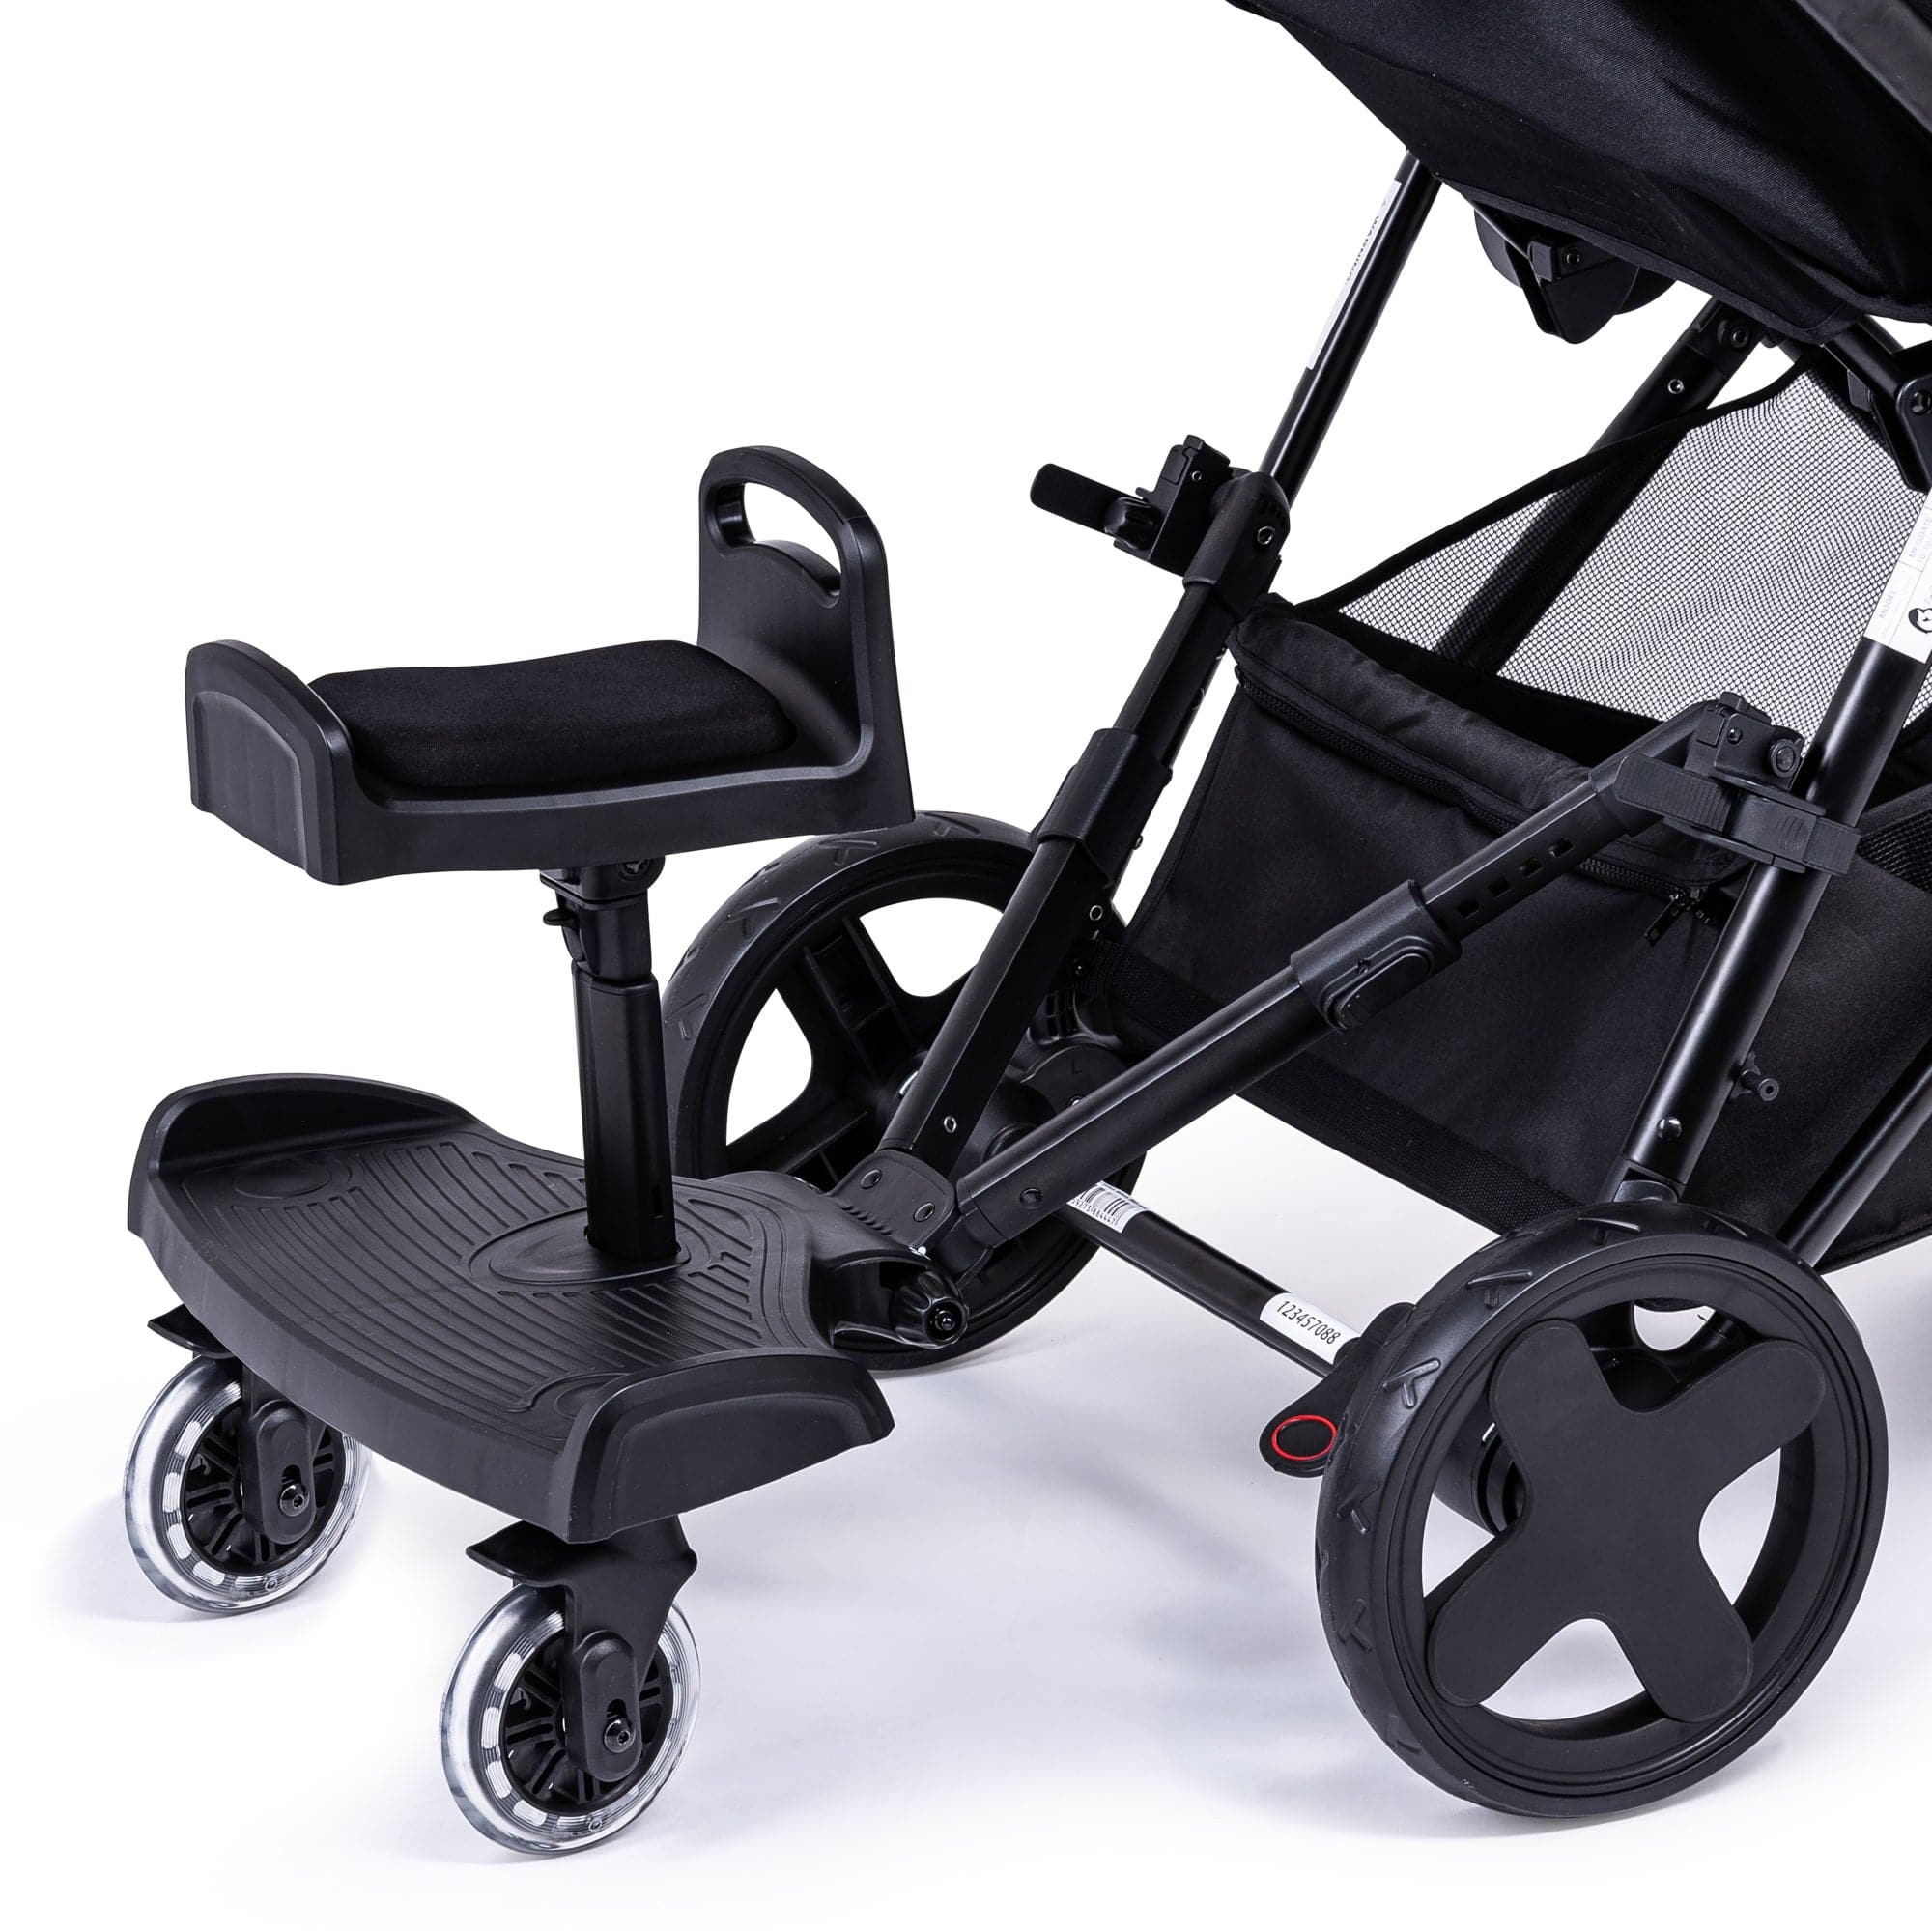 Ride On Board with Seat Compatible with Babylo - For Your Little One